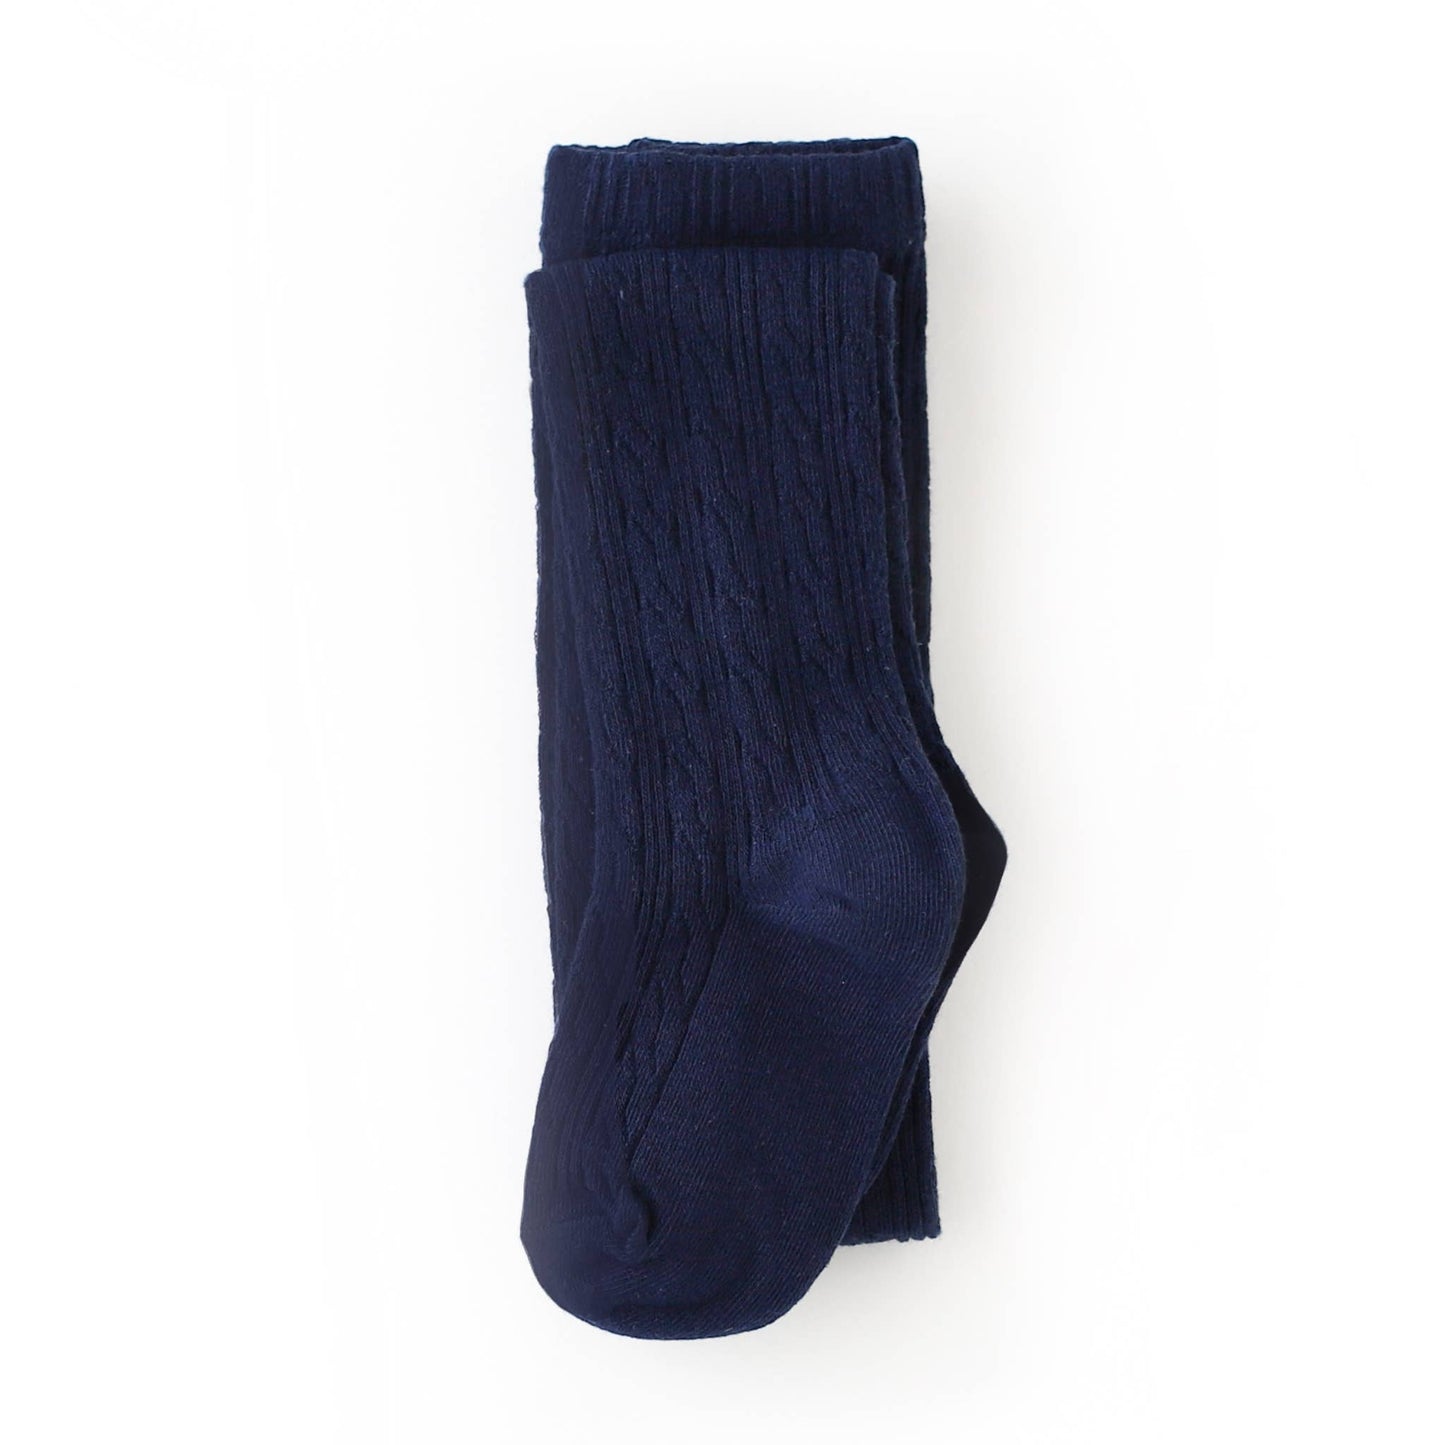 Navy Cable Knit Tights